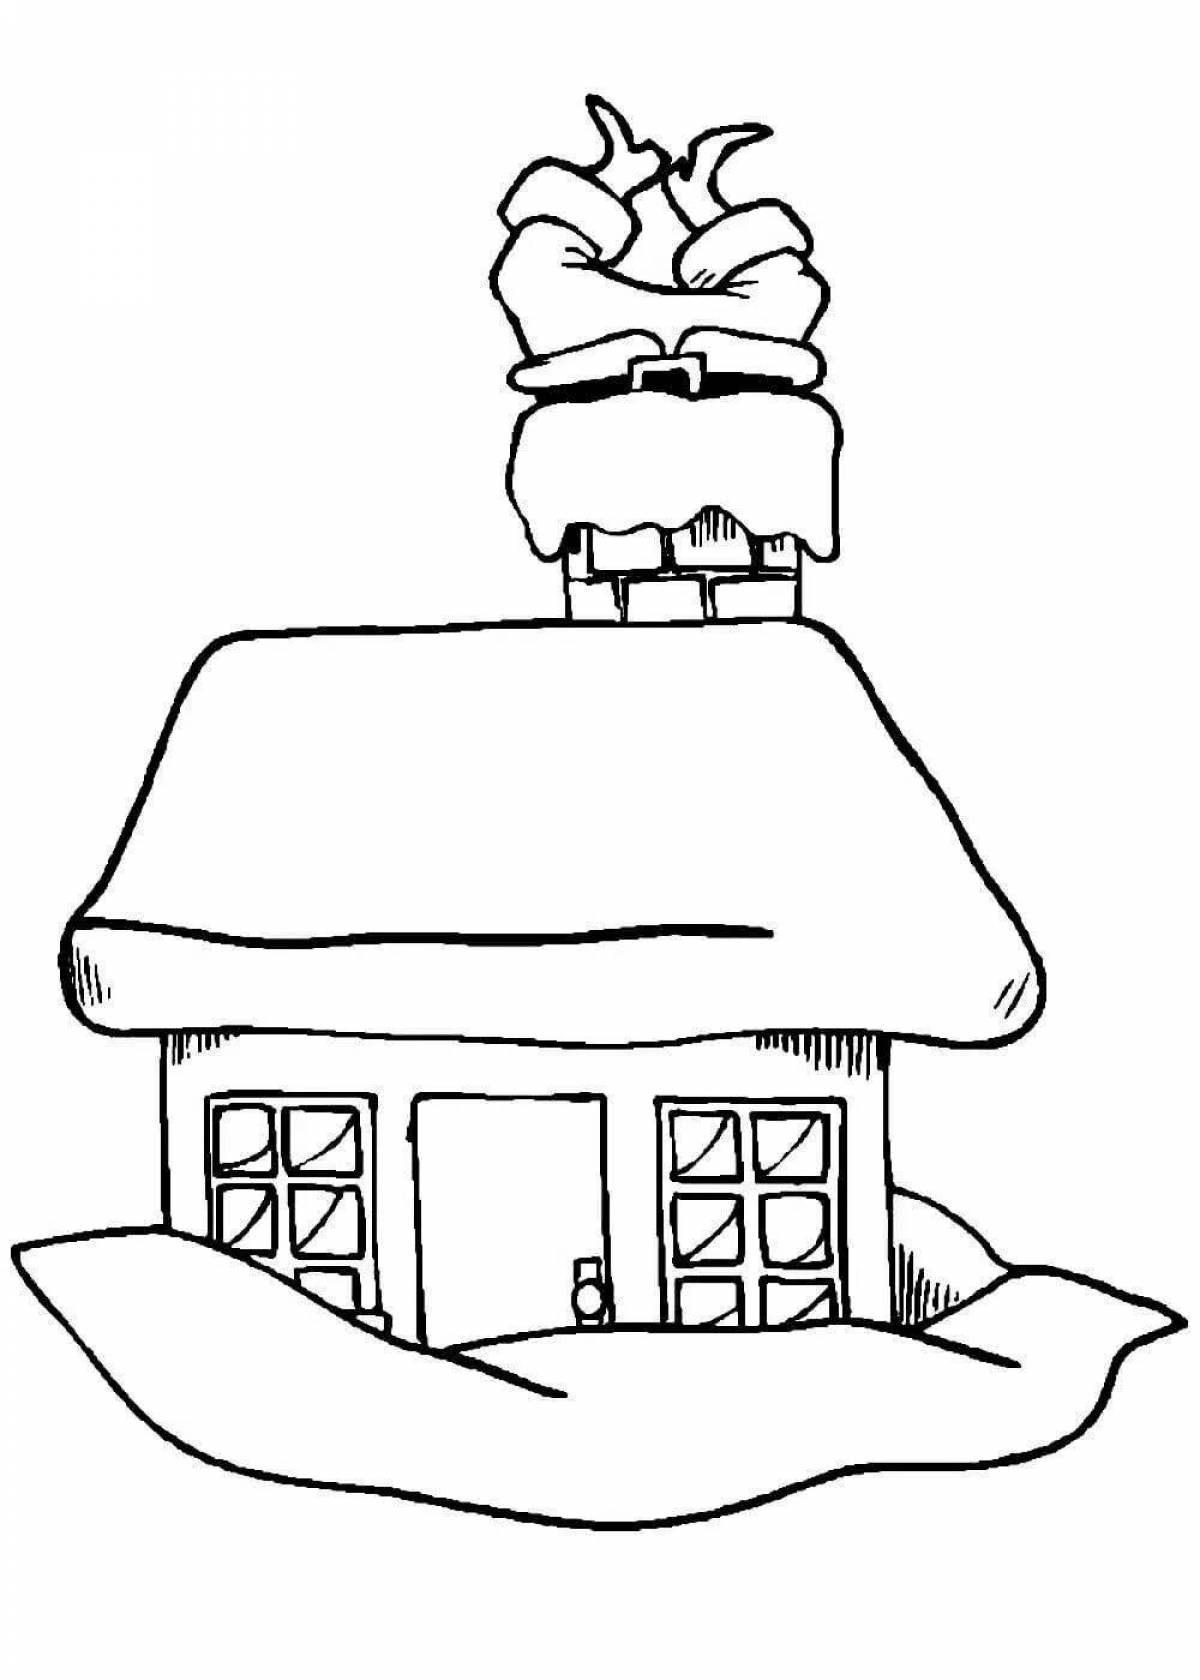 A fun winter house coloring book for kids